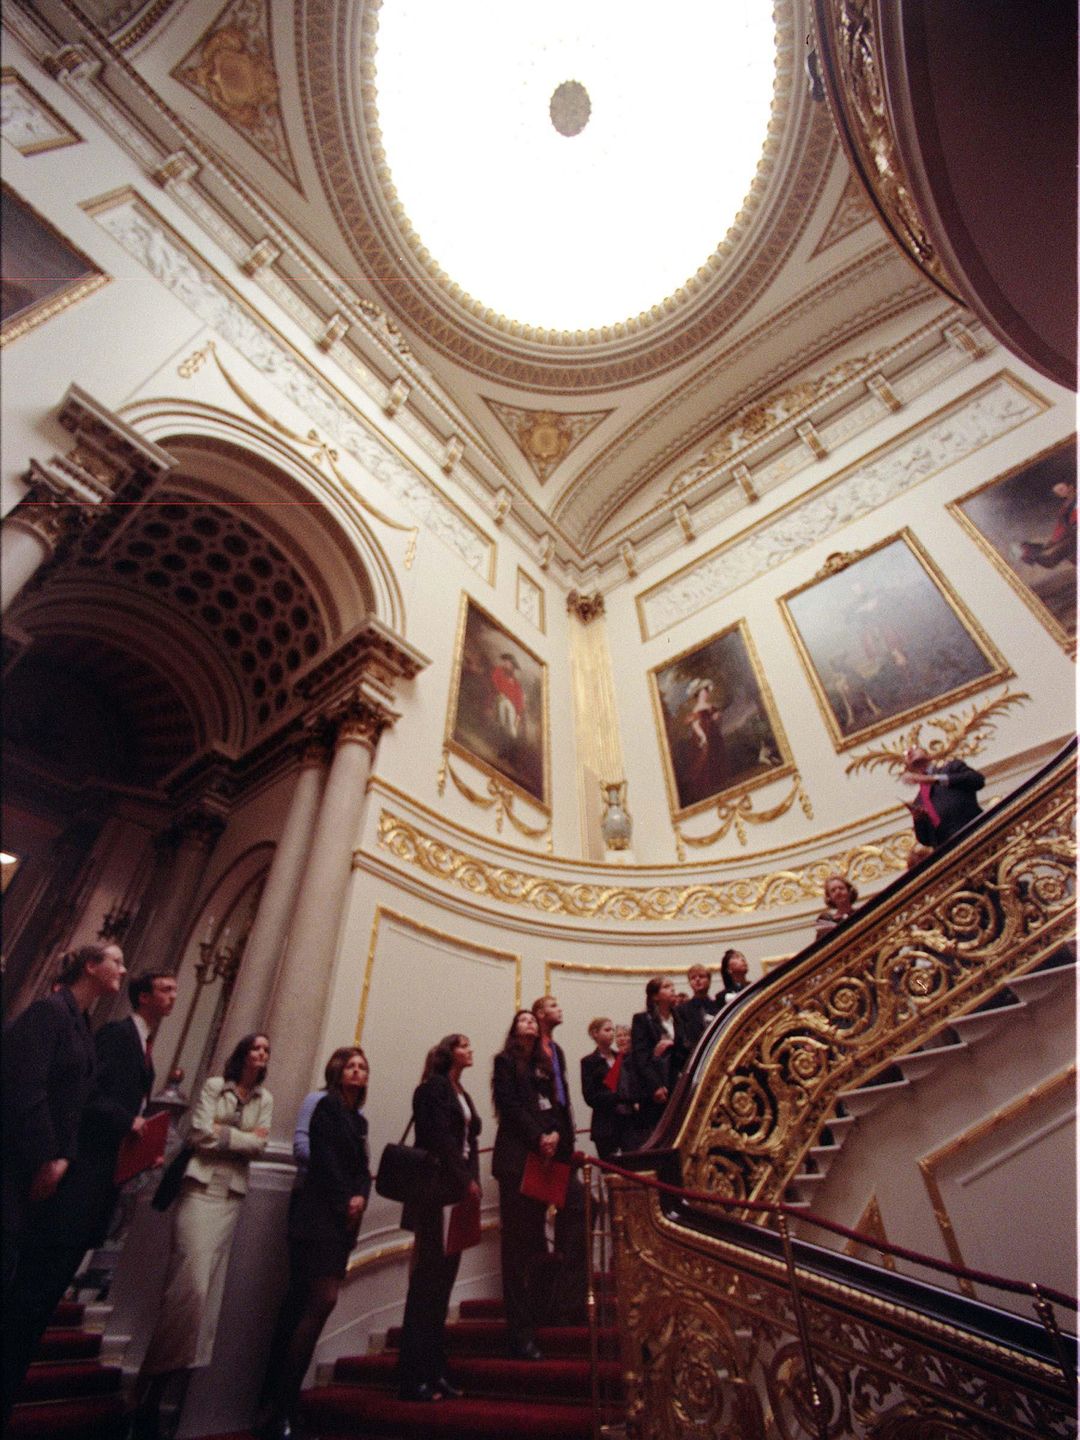 Guests climbing the Grand Staircase in Buckingham Palace